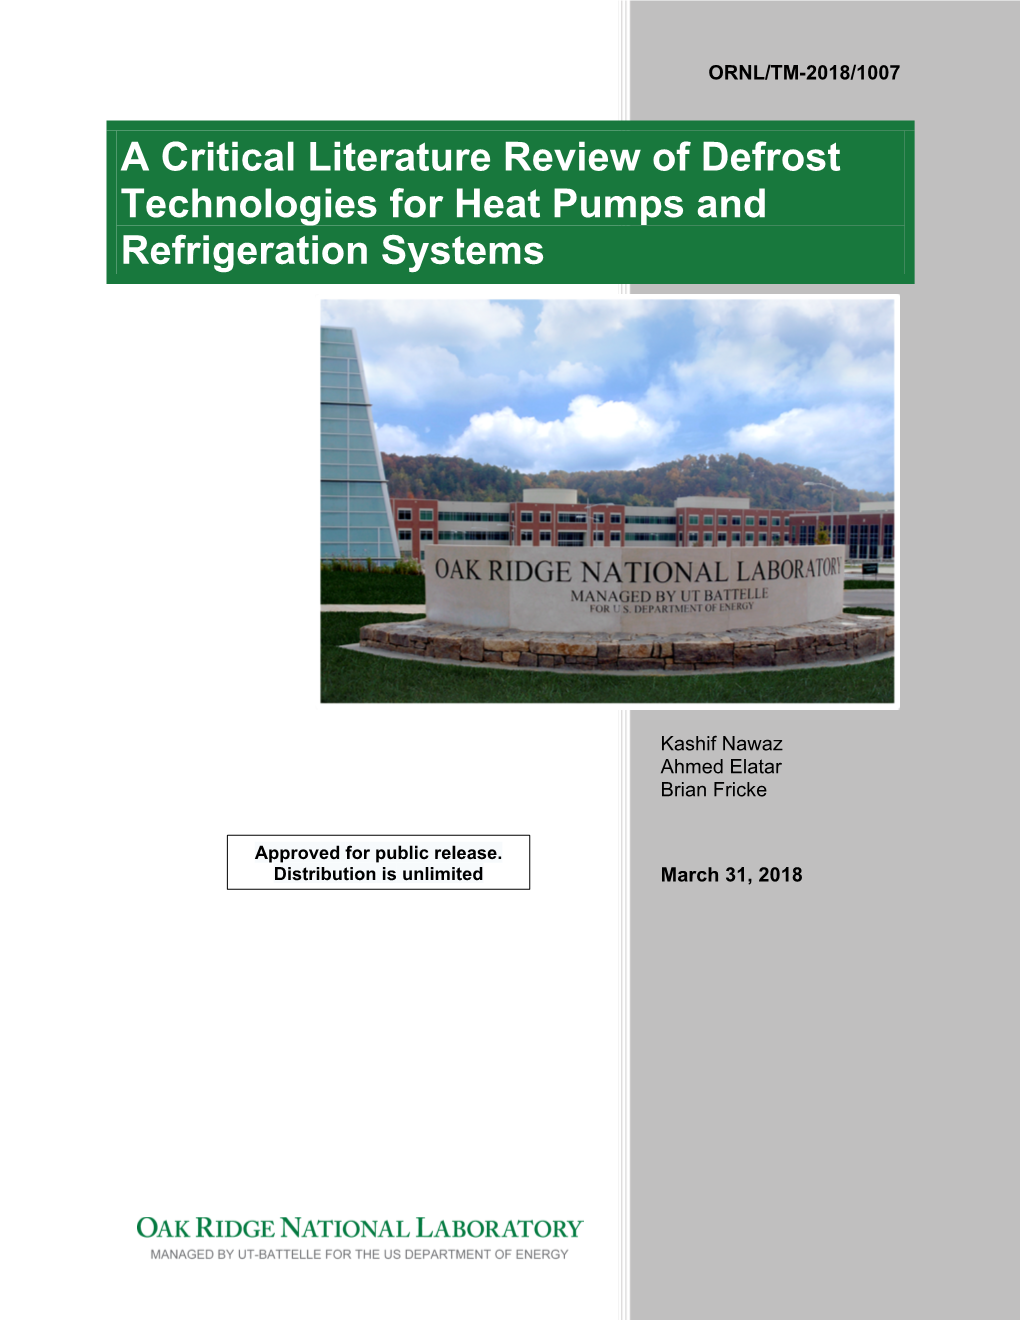 A Critical Literature Review of Defrost Technologies for Heat Pumps and Refrigeration Systems